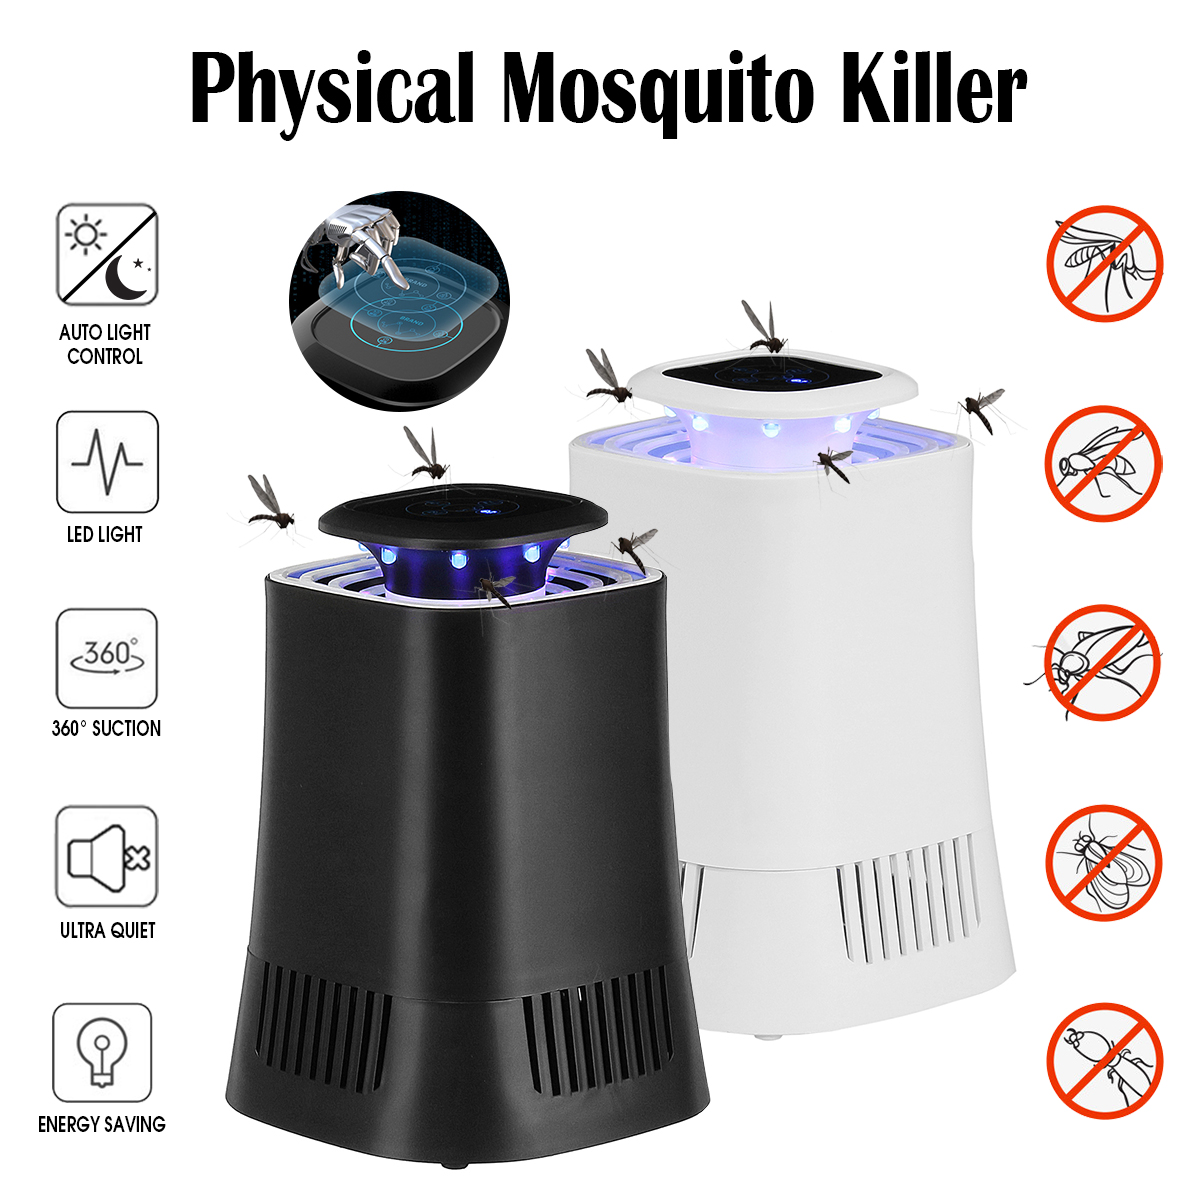 3W-Intelligent-Light-Control-Physical-Mosquito-Killer-Mosquito-Dispeller-Insect-Killer-Lamp-1326432-2